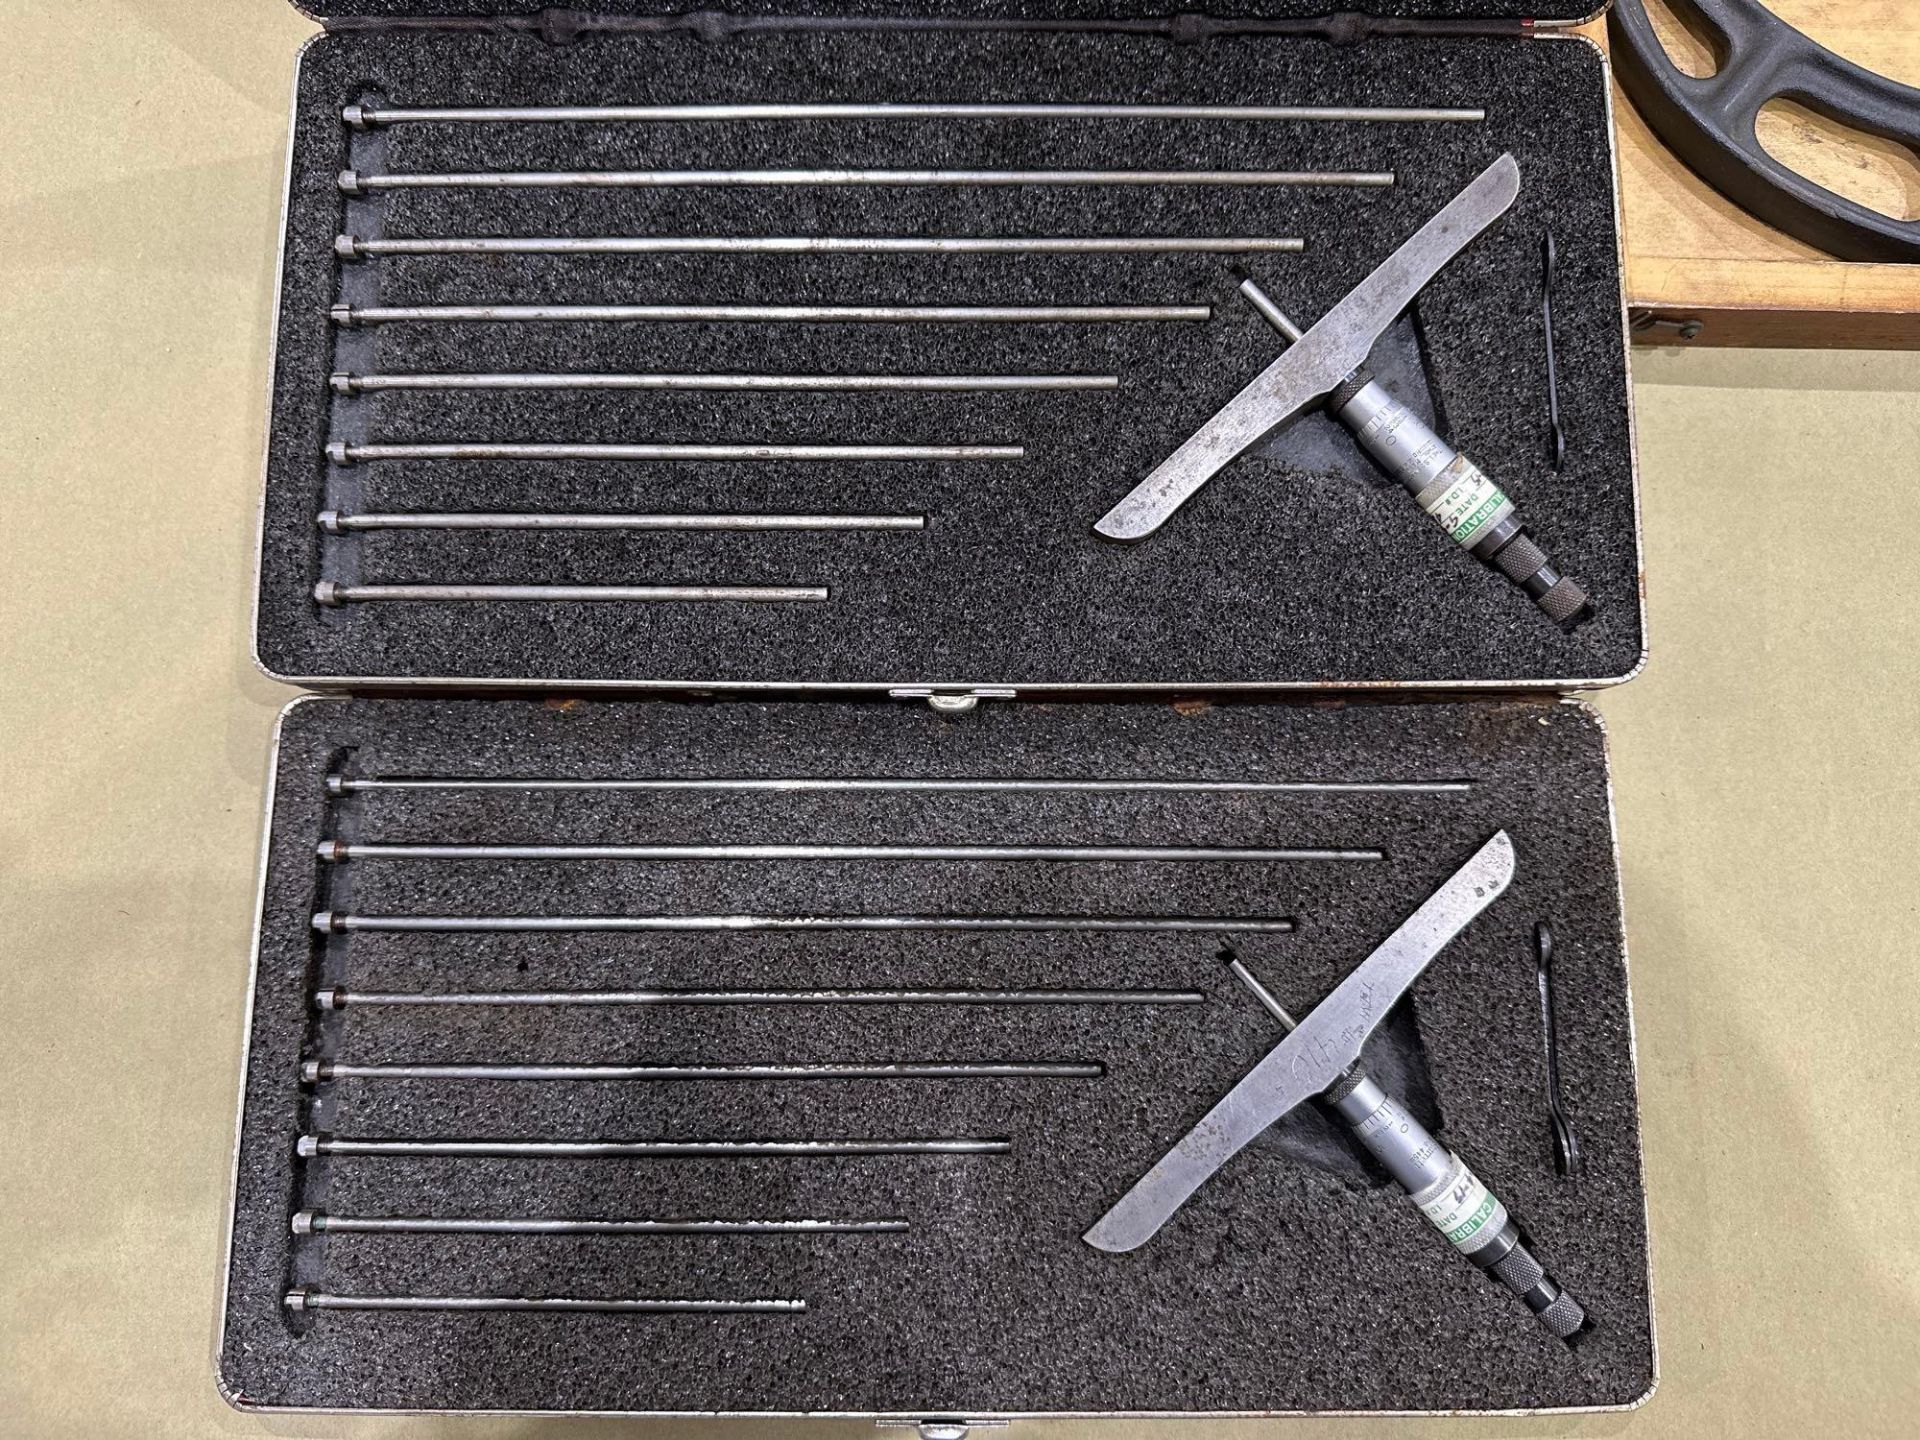 Lot of 4 Assorted Starrett and Mitutoyo Micrometers: Depth, OD, Standard Sets. See Detail - Image 3 of 6